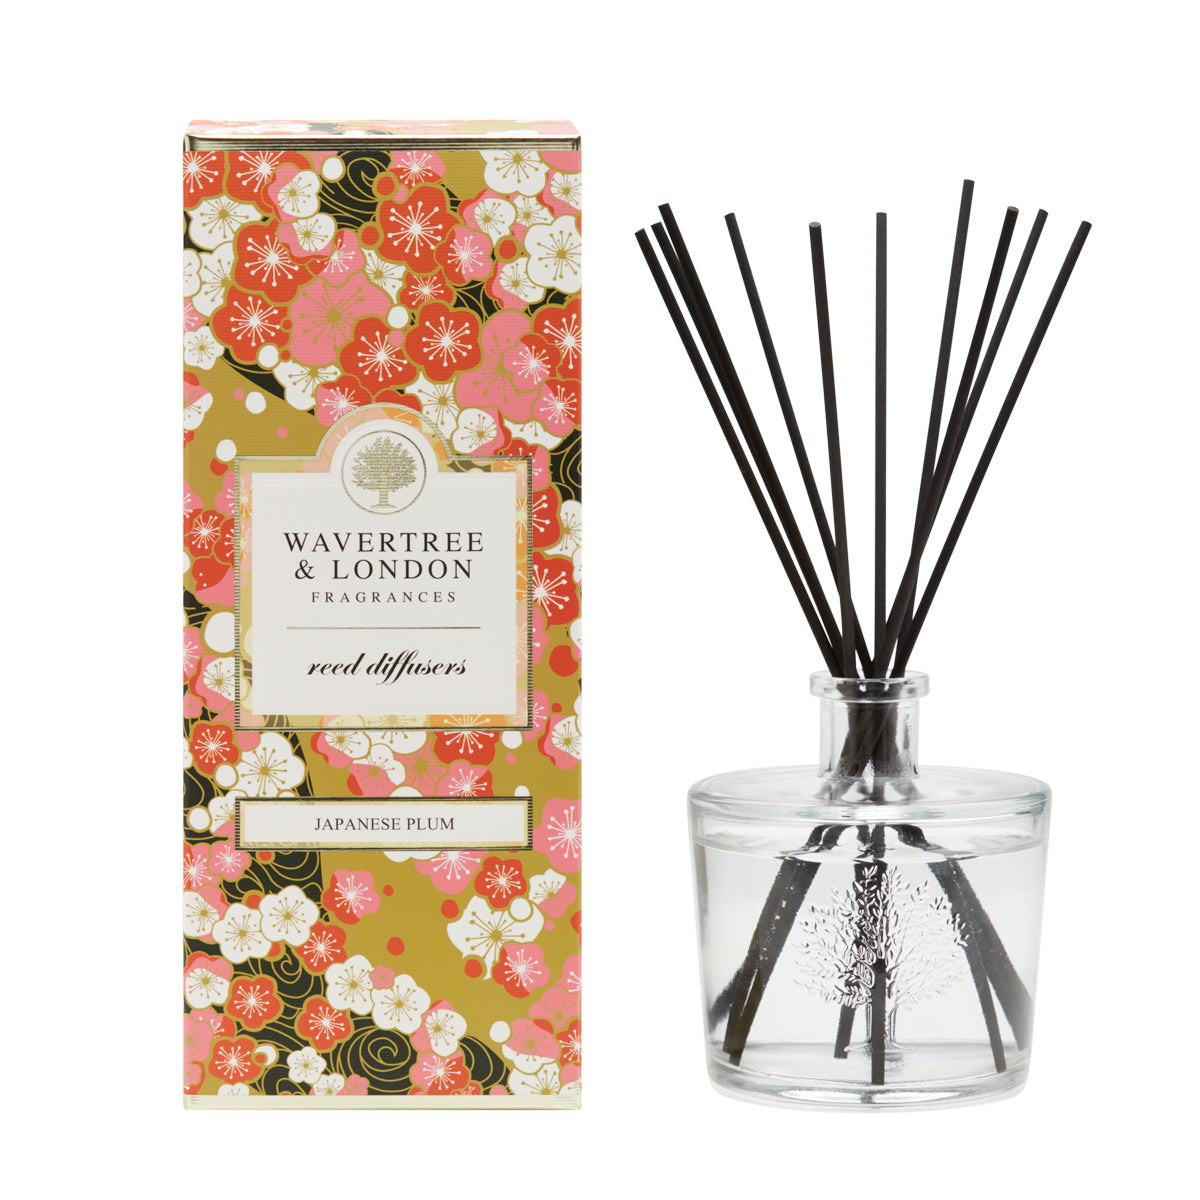 Japanese plum diffuser with glass bottle and black reeds